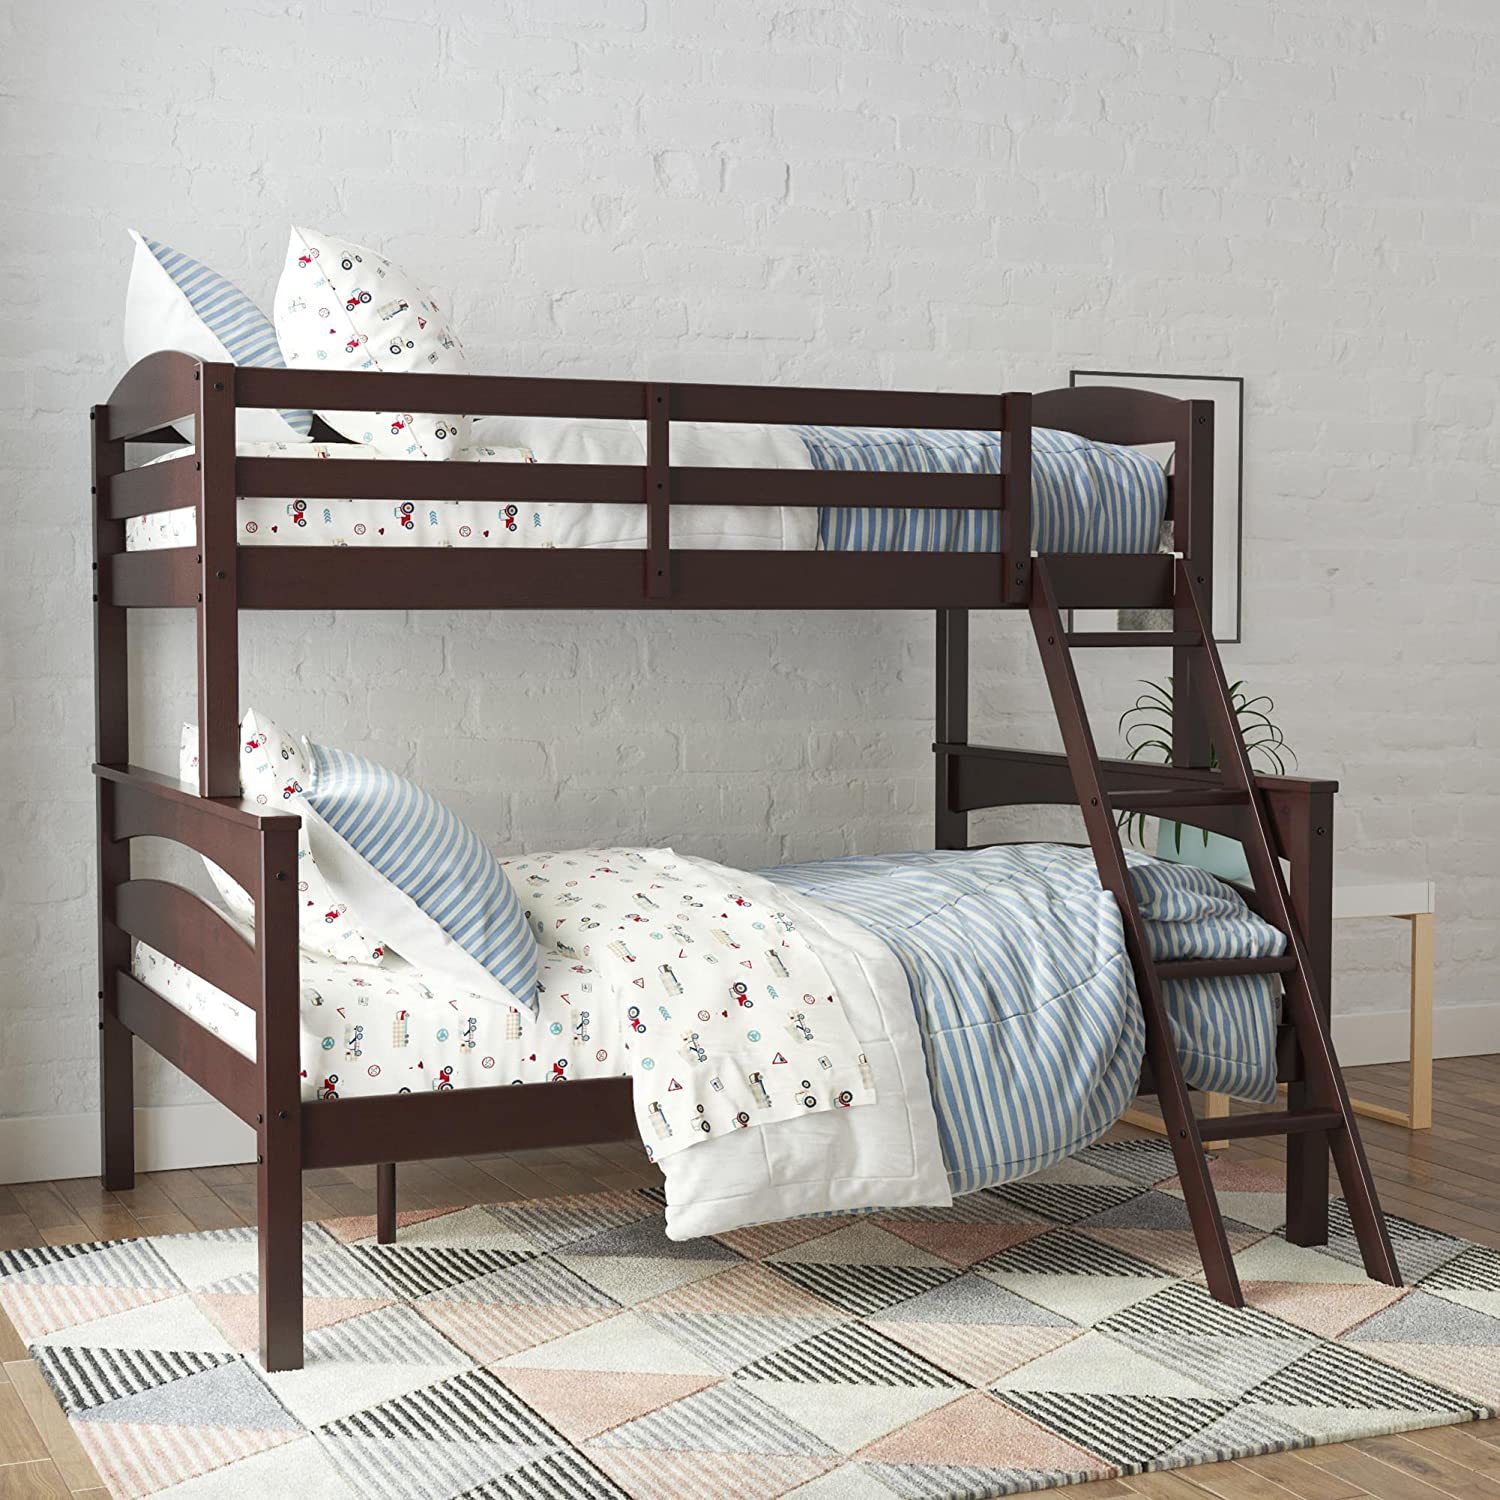 Dorel Living Brady Solid Wood Bunk Beds Twin Over Full with Ladder and Guard - $454.99